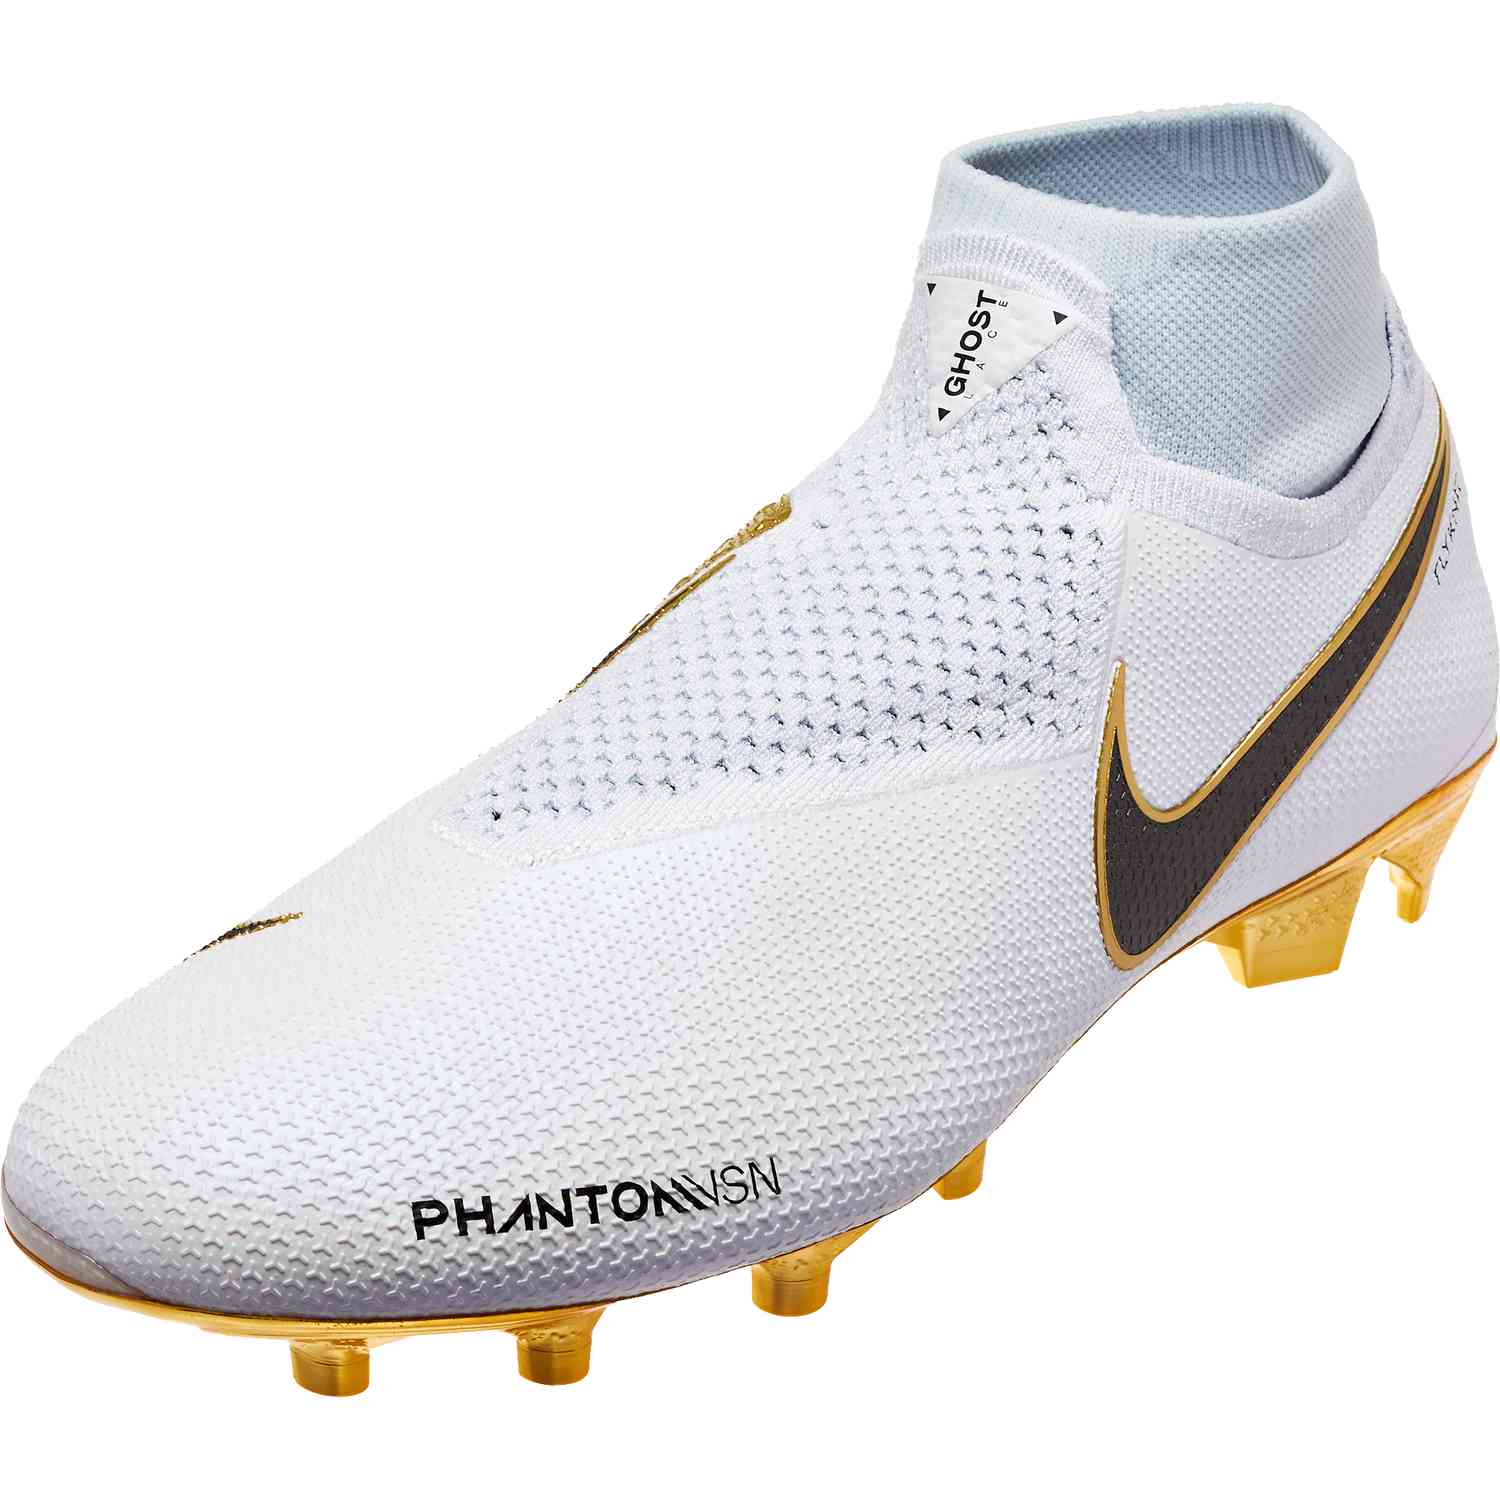 phantom vision cleats Nike Football Shoes Cleats for sale